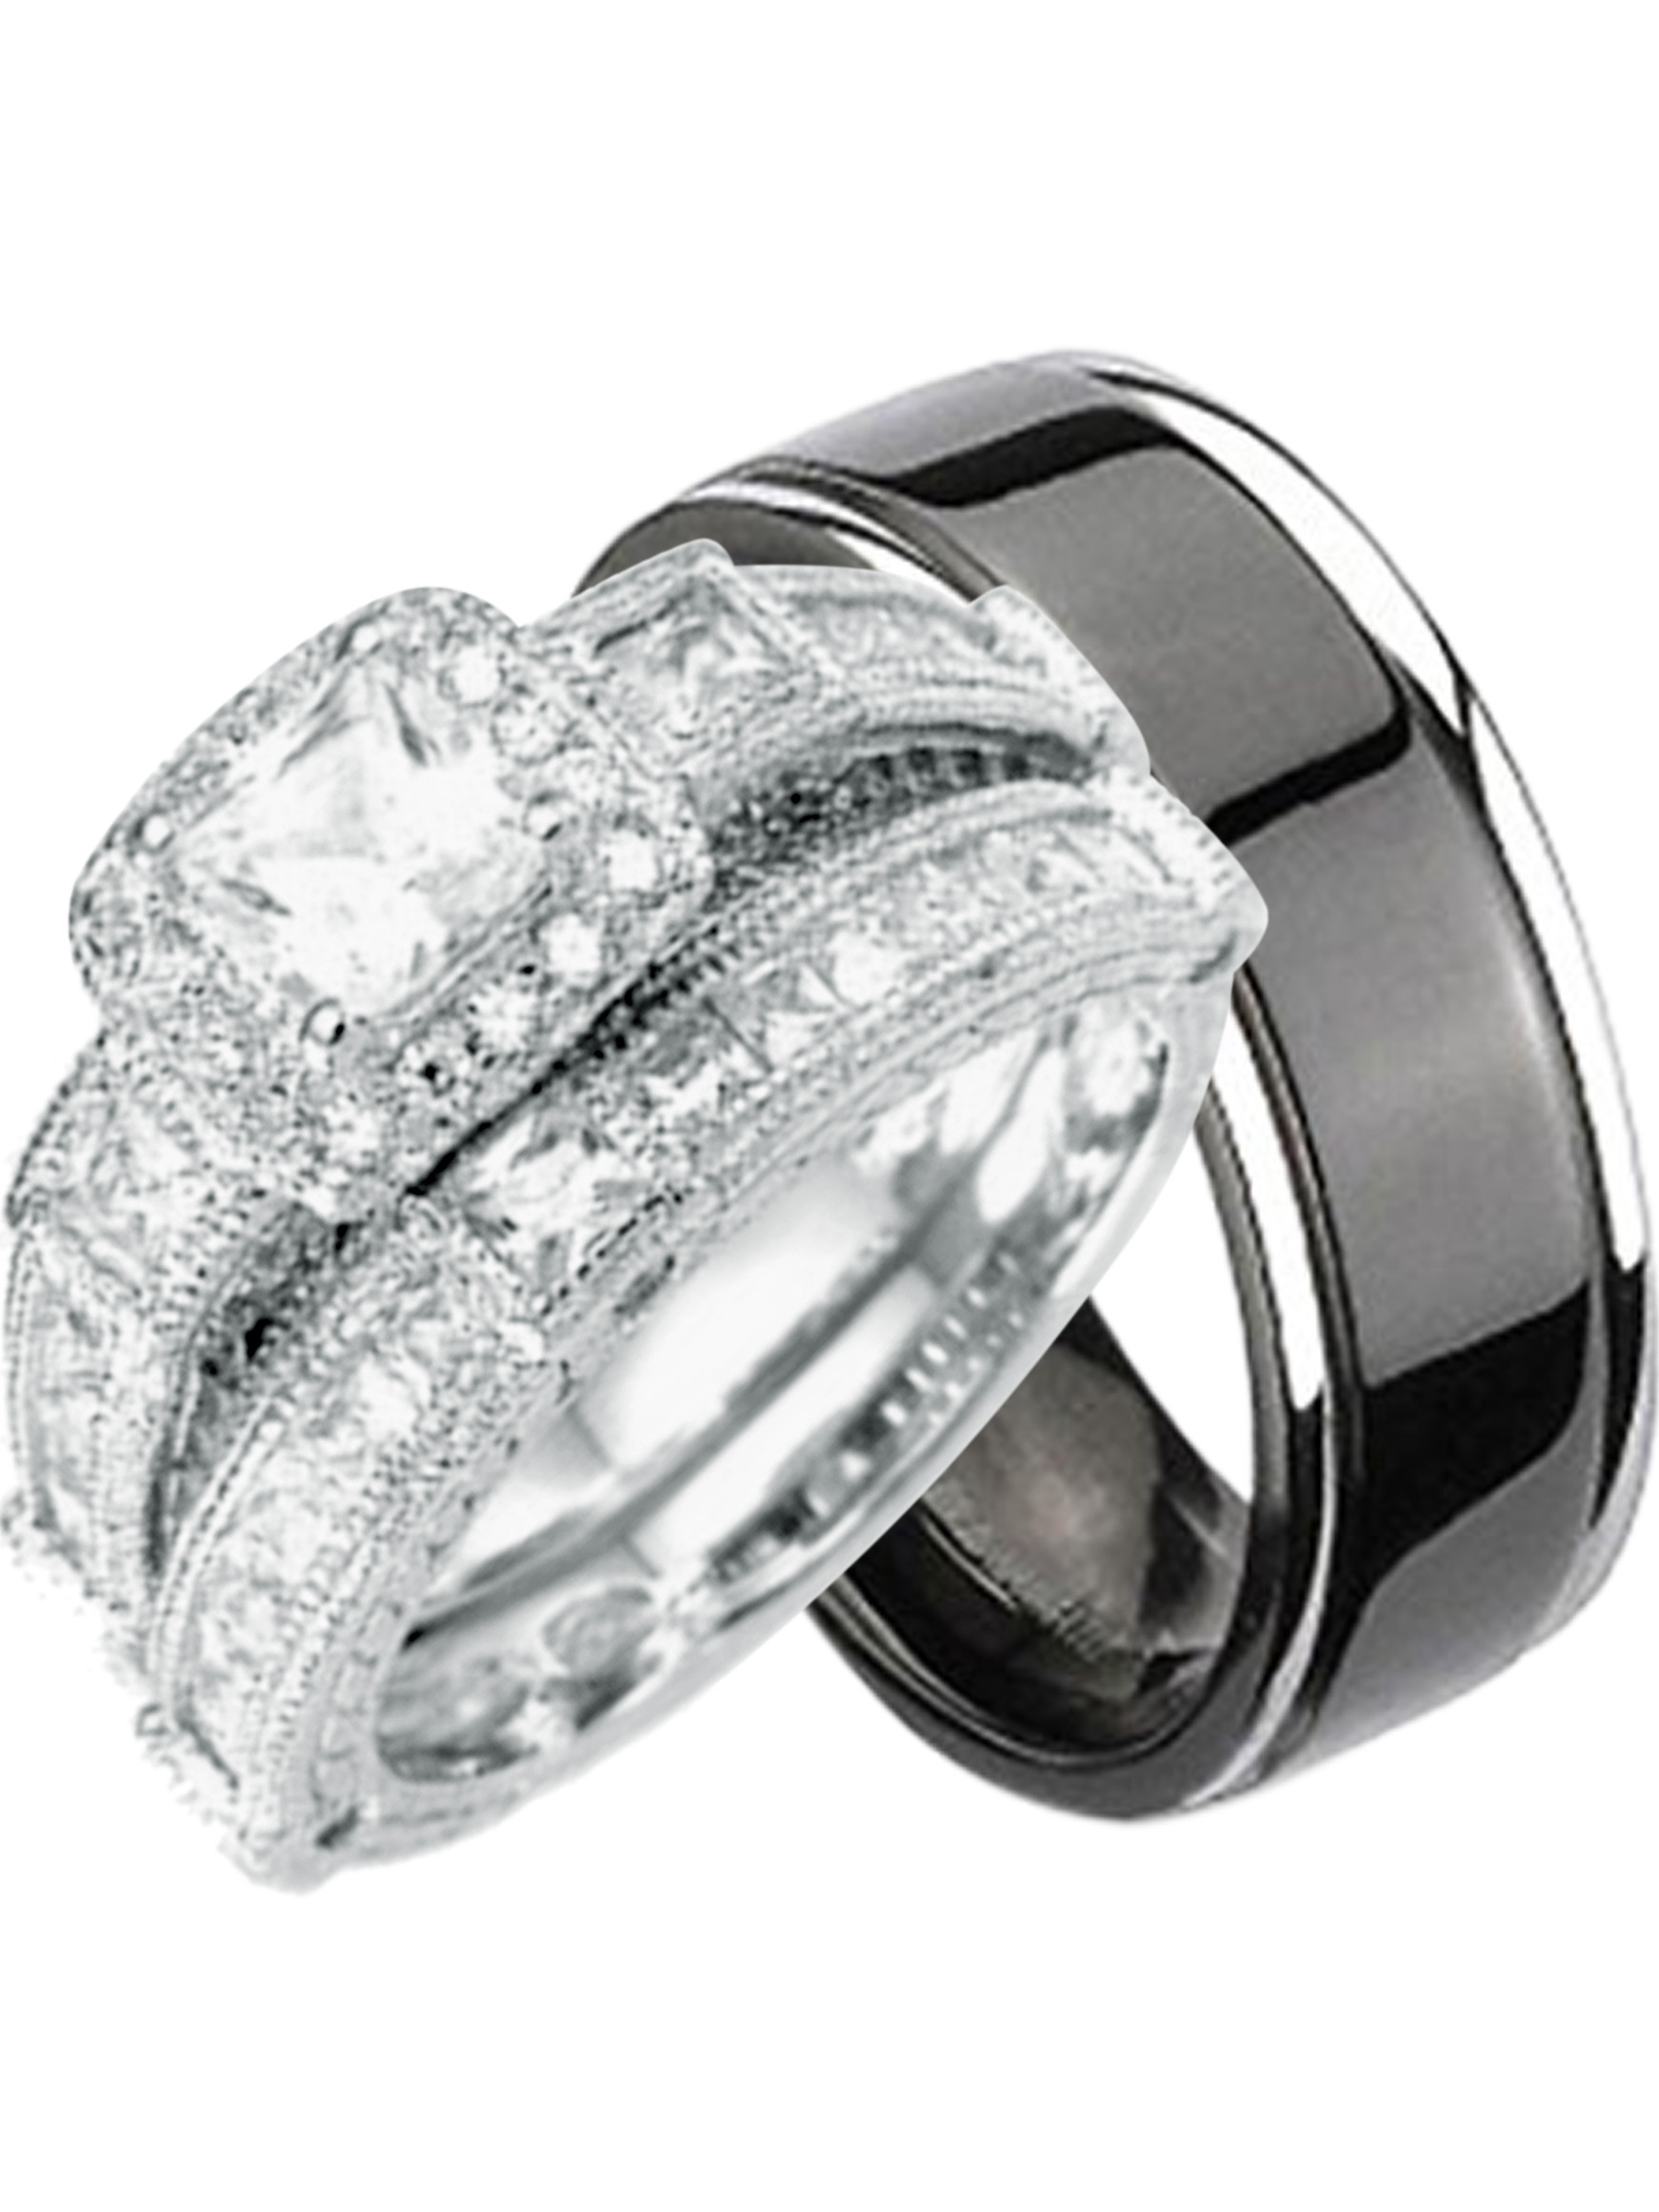 Wedding Ring Sets For Him And Her Cheap
 LaRaso & Co His and Hers Wedding Ring Set Cheap Wedding